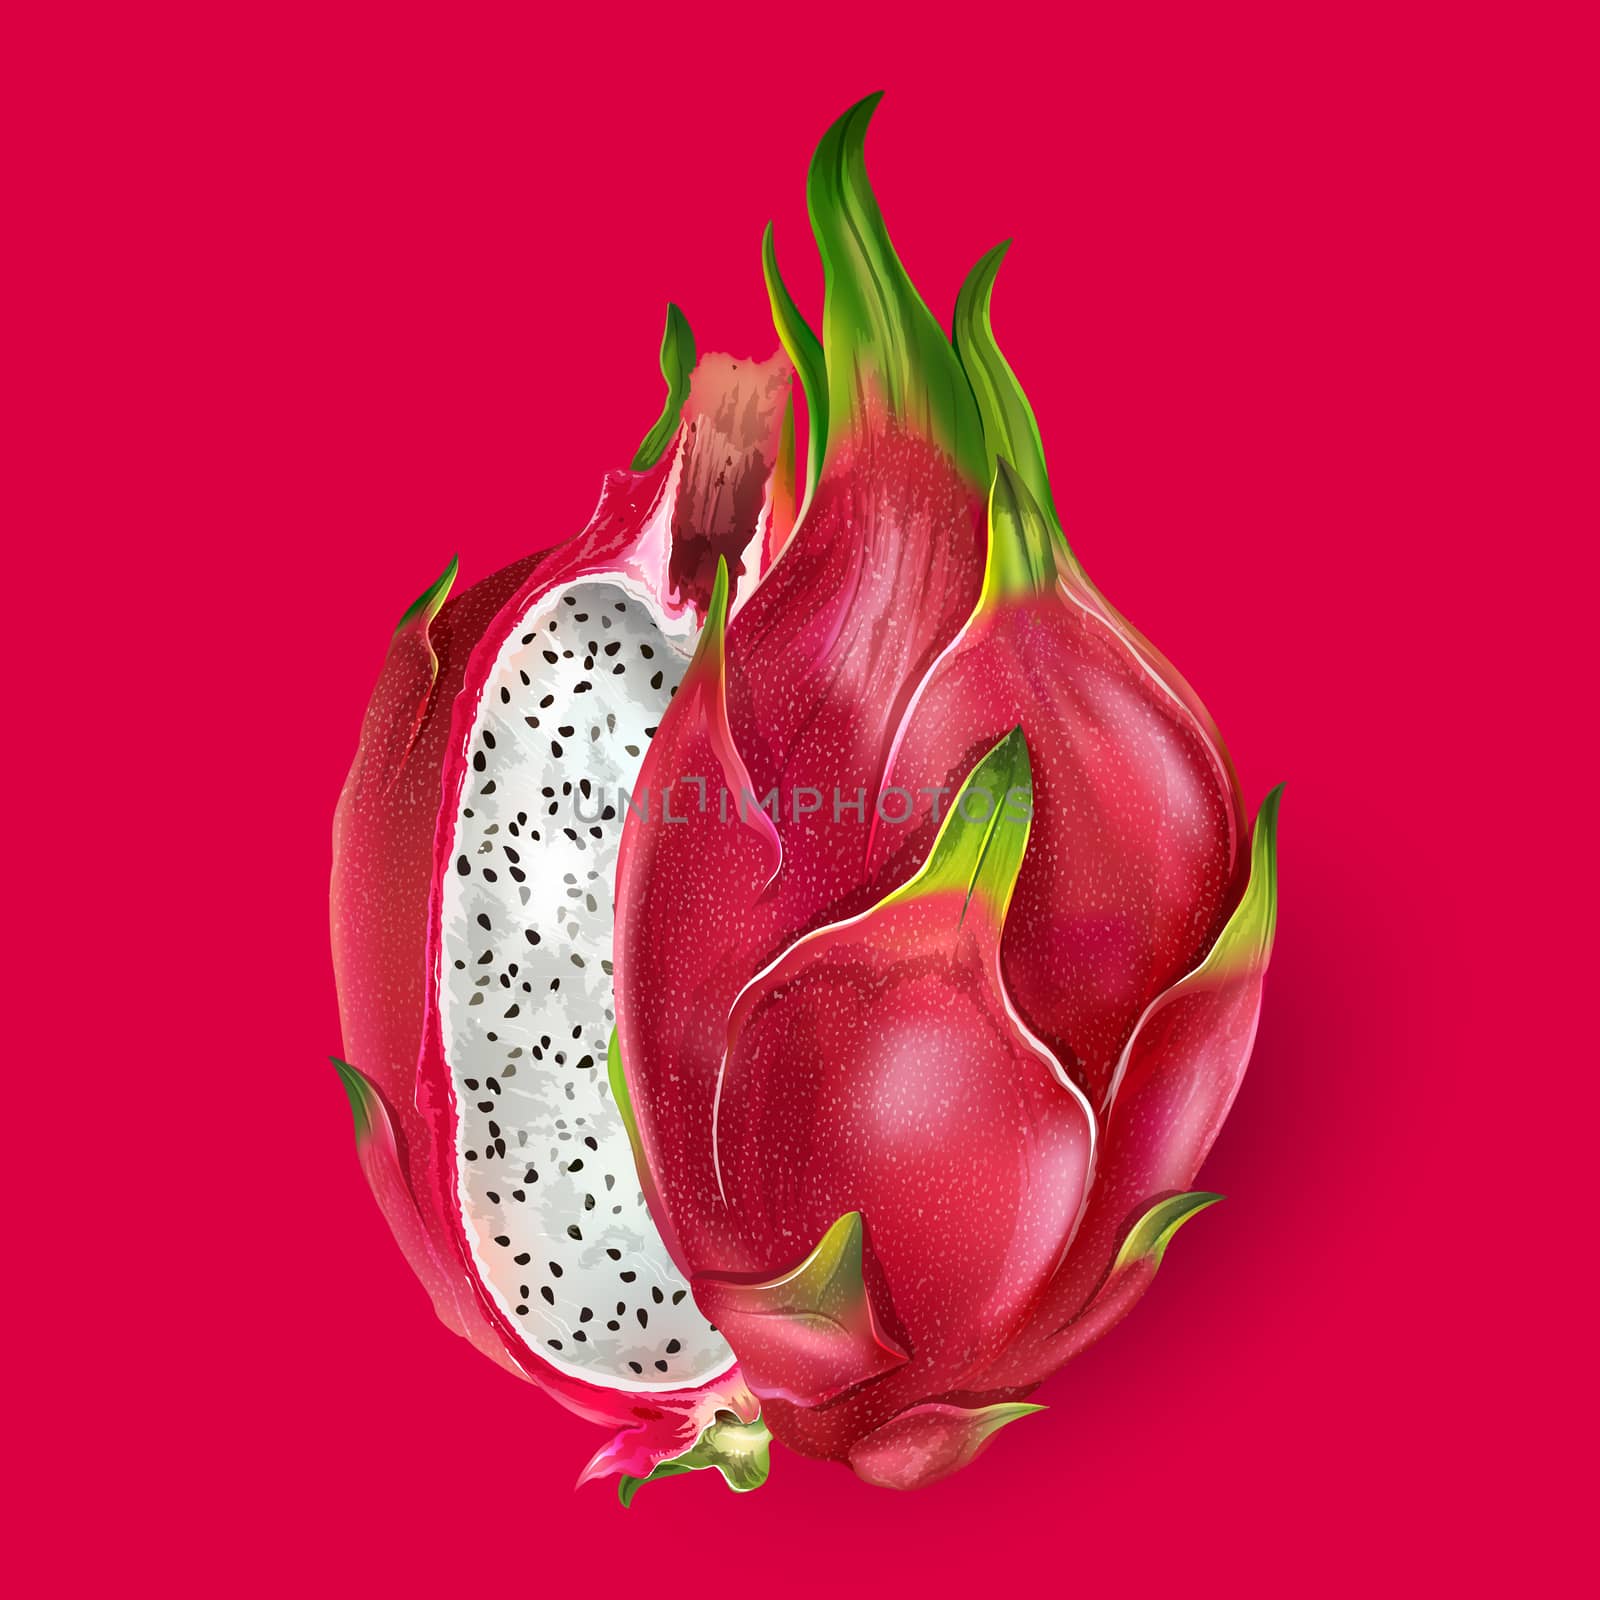 Dragon fruit on bright red background.